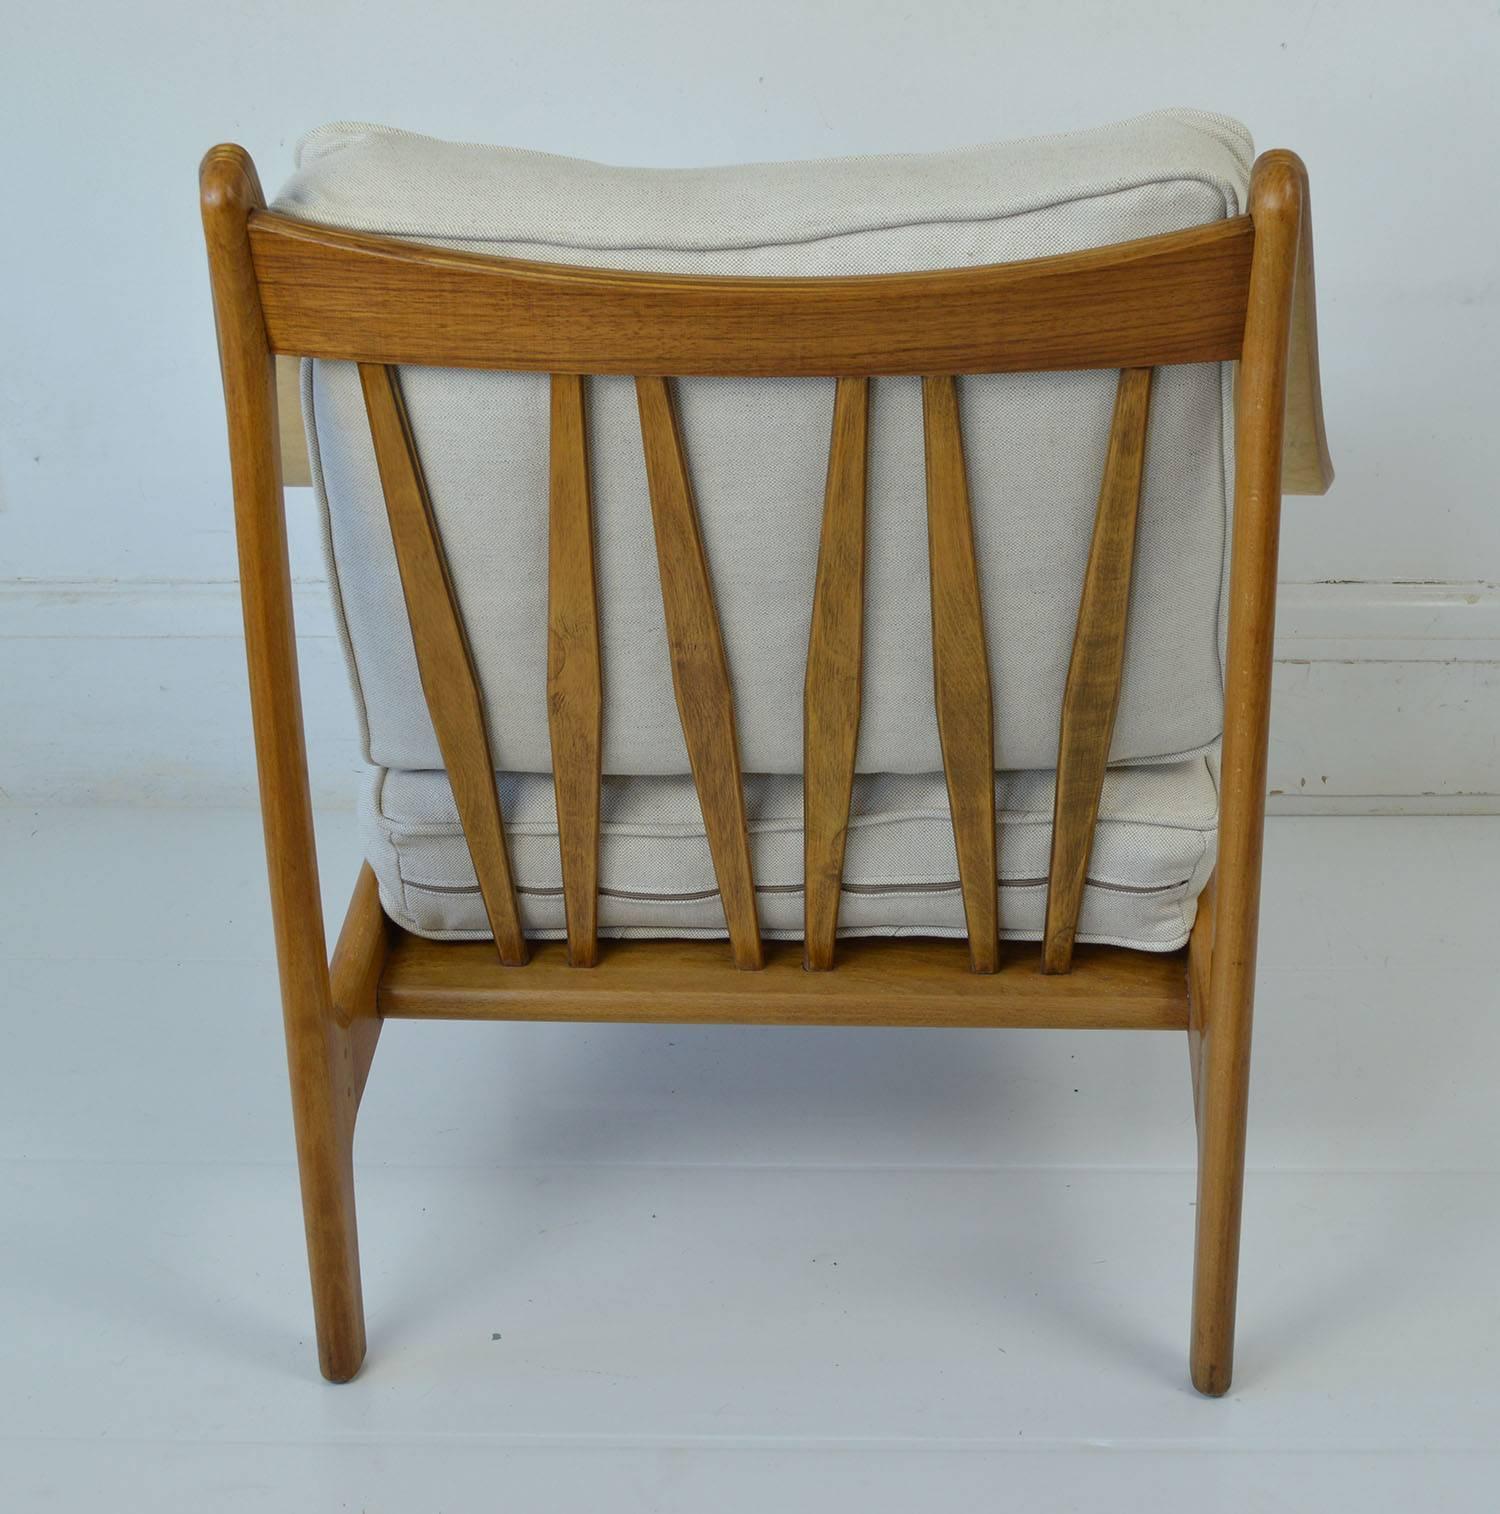 English Midcentury Scandinavian Style Bent Ply and Beech Chair